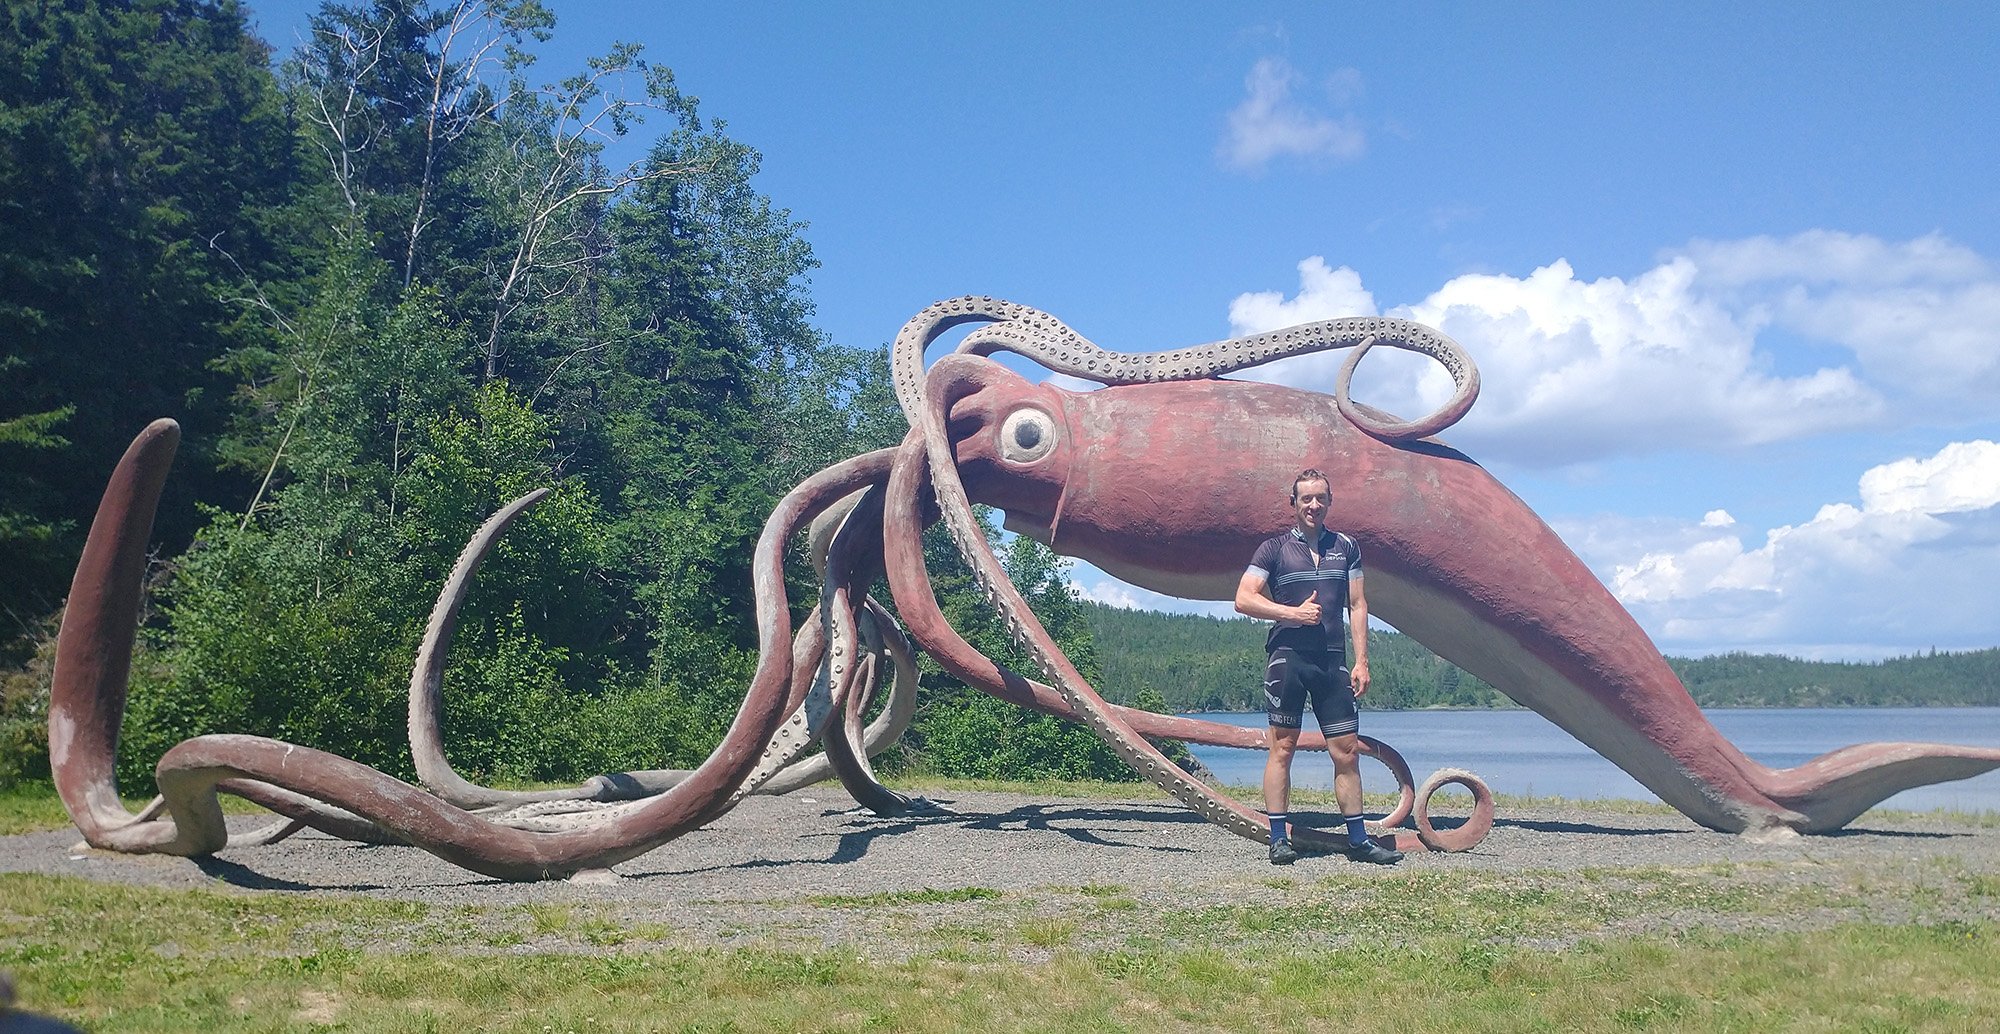 What a monster. But cool squid statue though.